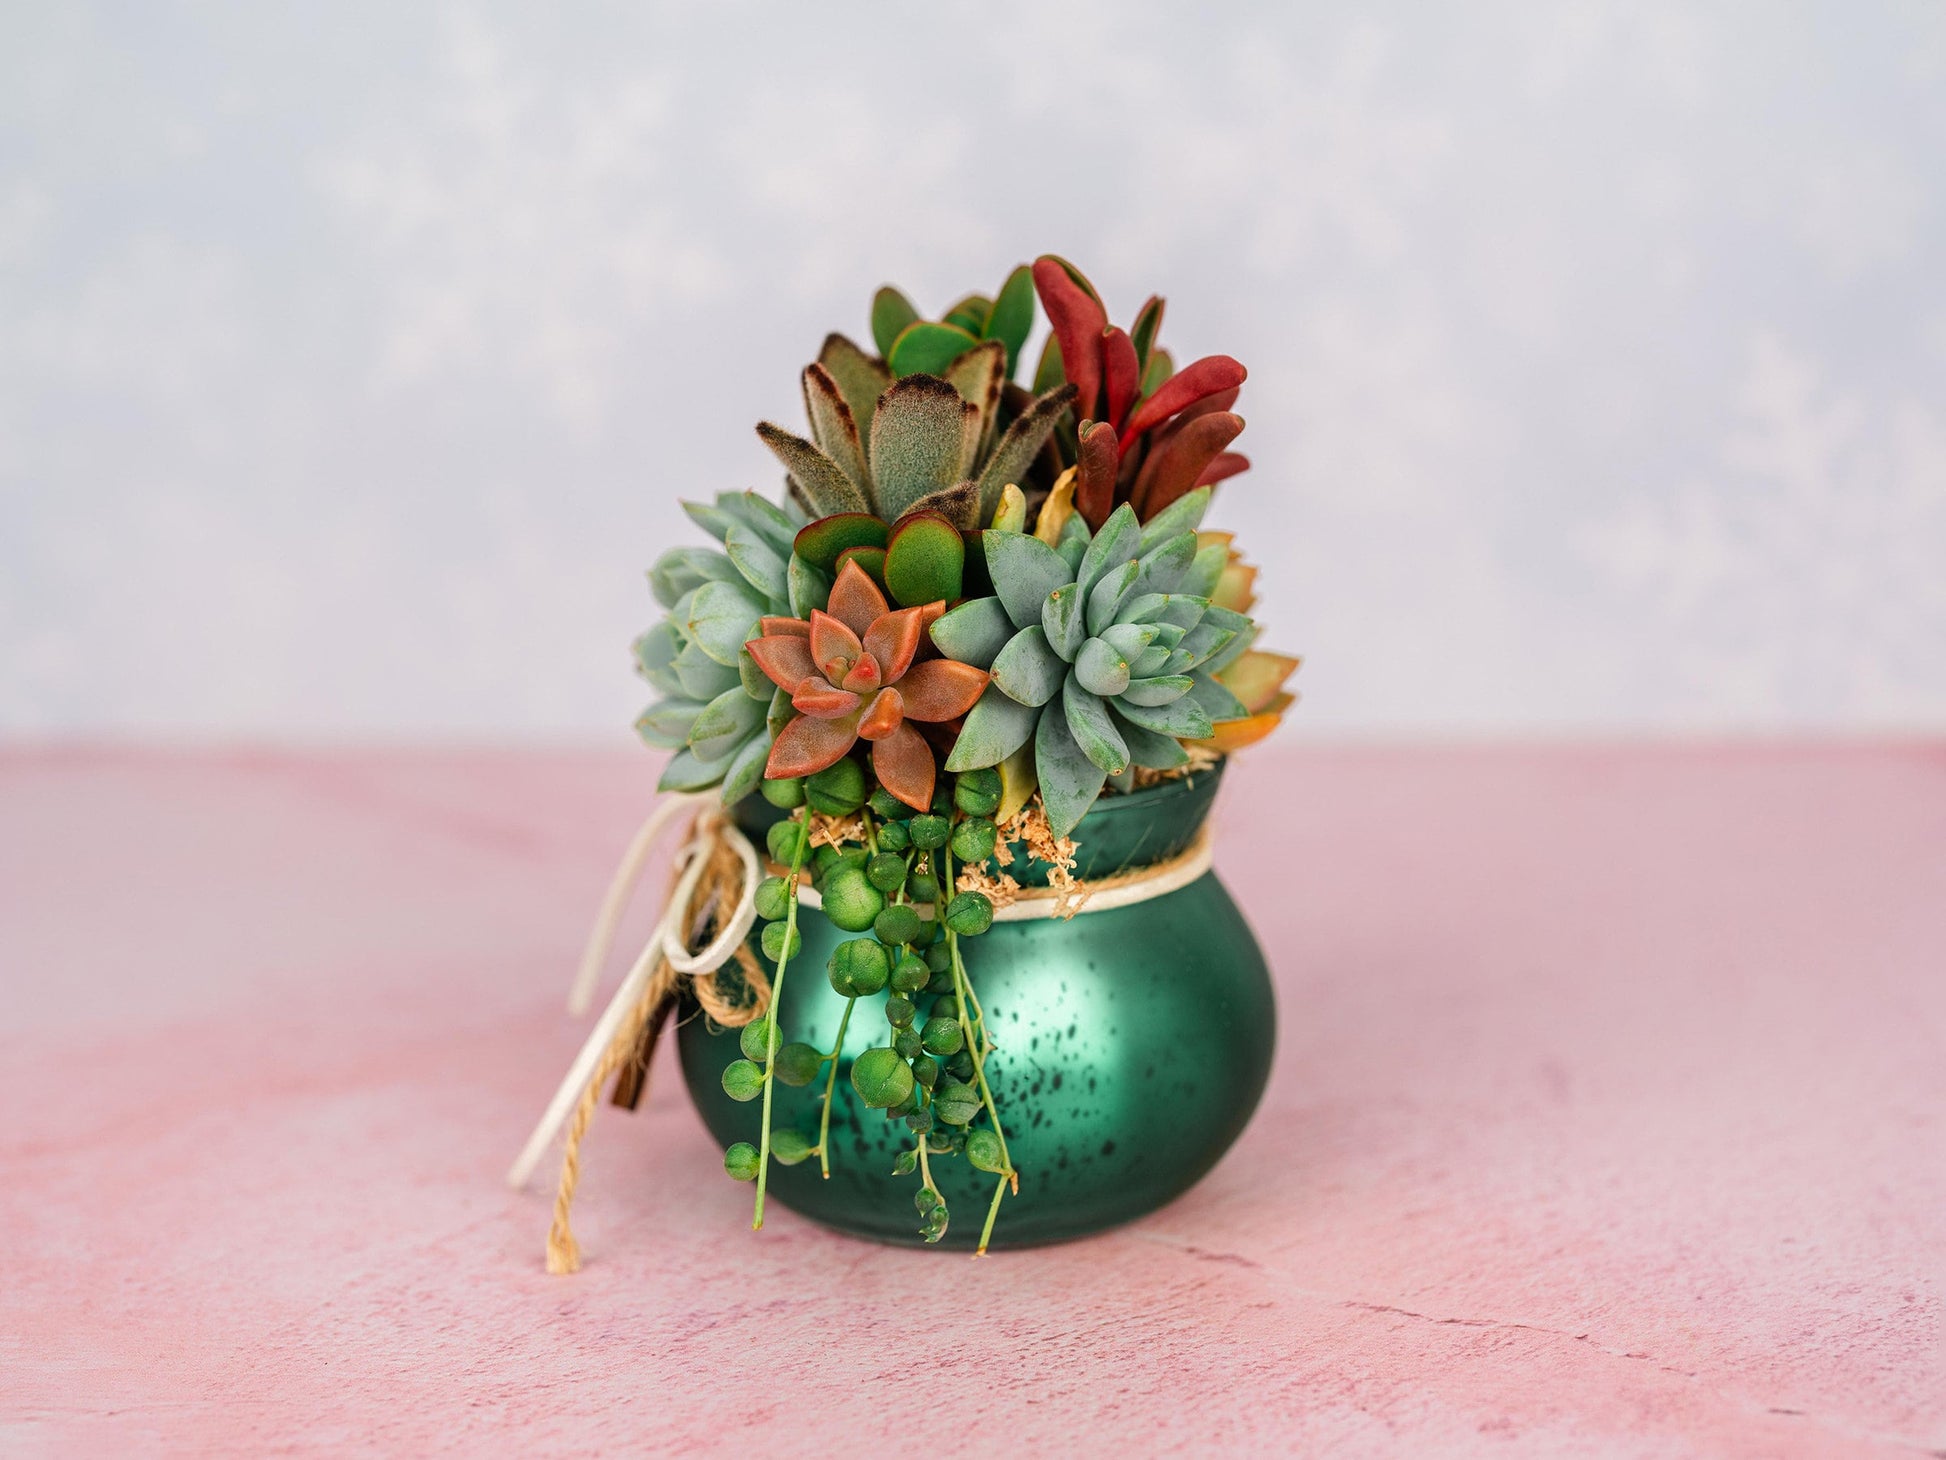 Green Mercury Glass Christmas Succulent Gift Arrangement with Rustic Wood Star- Small Gift or Holiday Decor Centerpiece